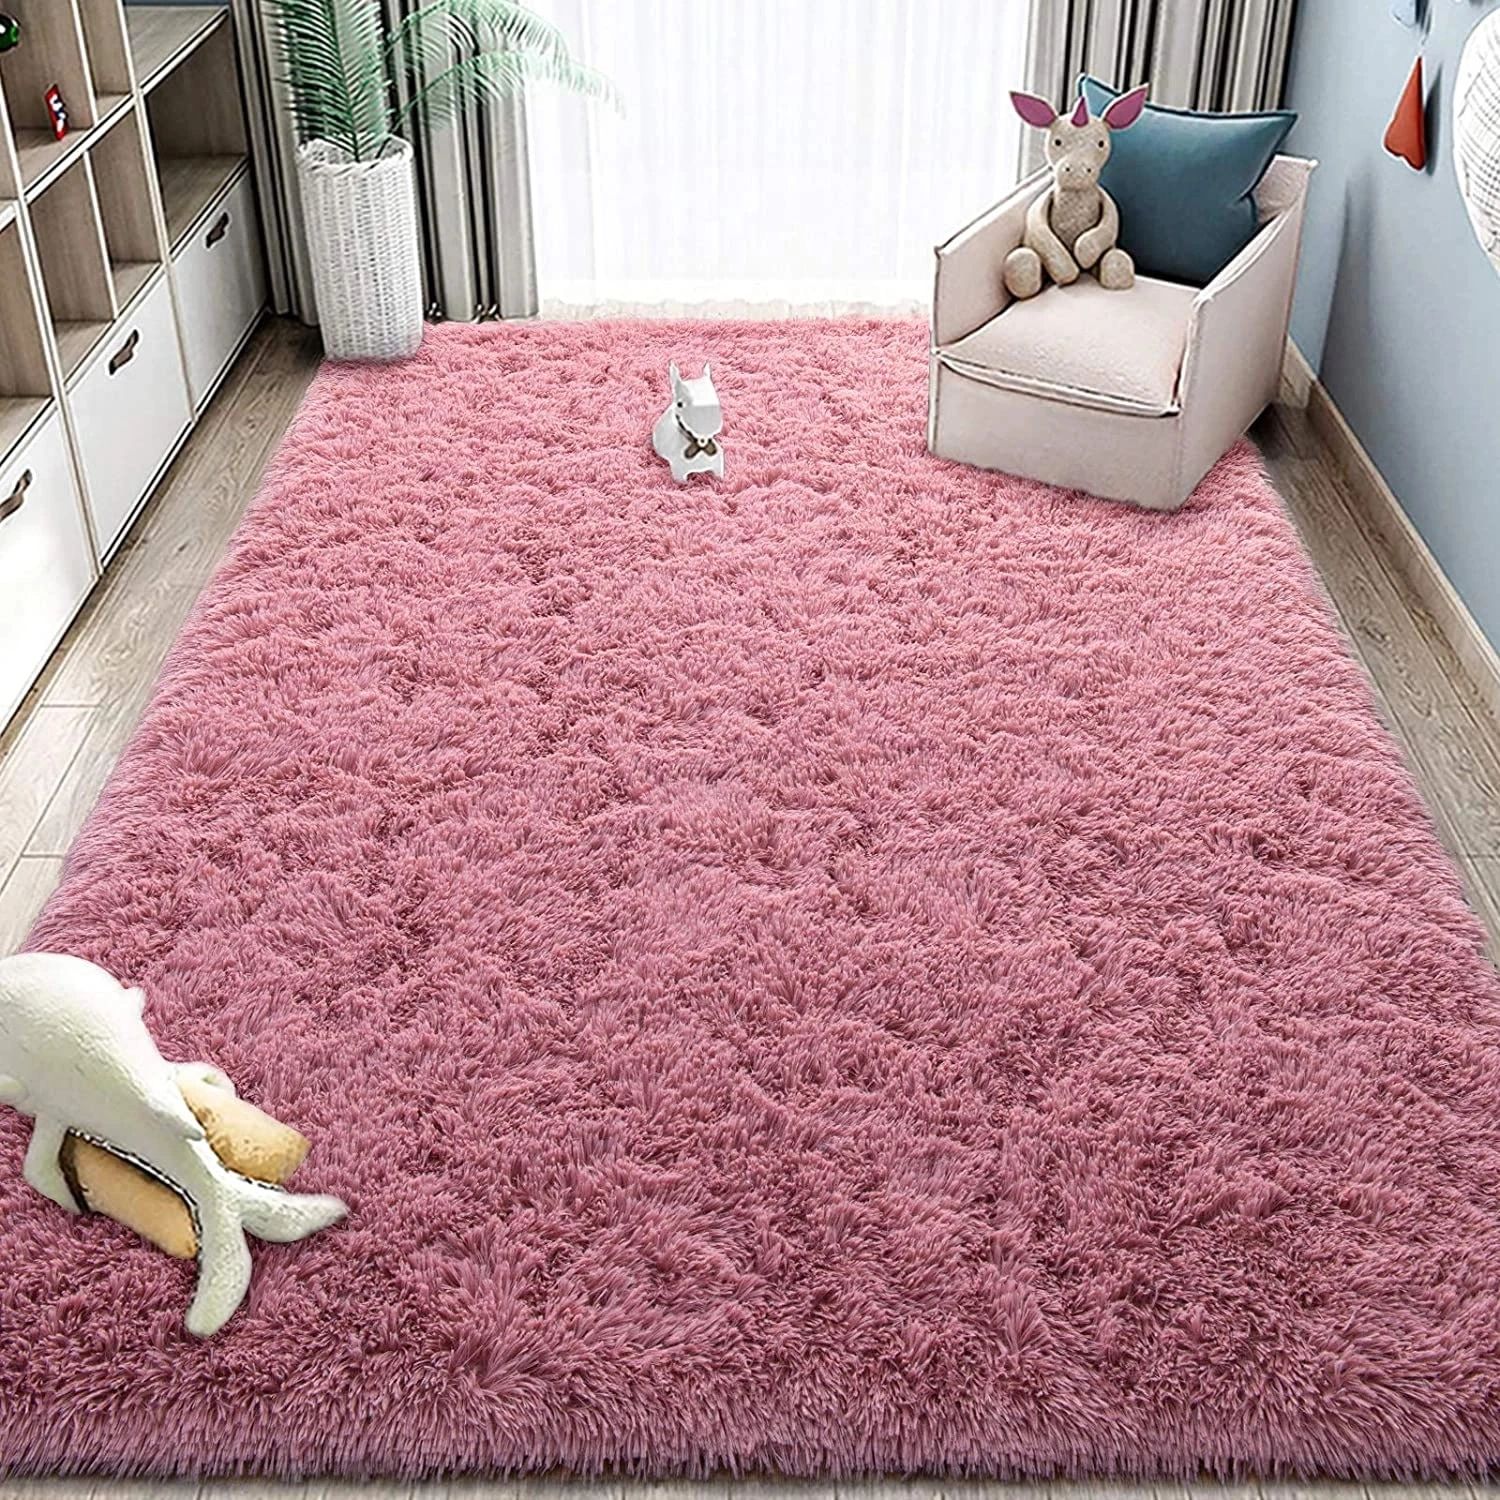 Ultra Soft Plush Shaggy Carpet Living Room Rug Fluffy Area Rug For Kids  Room Nursery Home Decor Fuzzy Rug With Anti Slip Bottom – Carpet –  Aliexpress For Pink Soft Touch Shag Rugs (View 3 of 15)